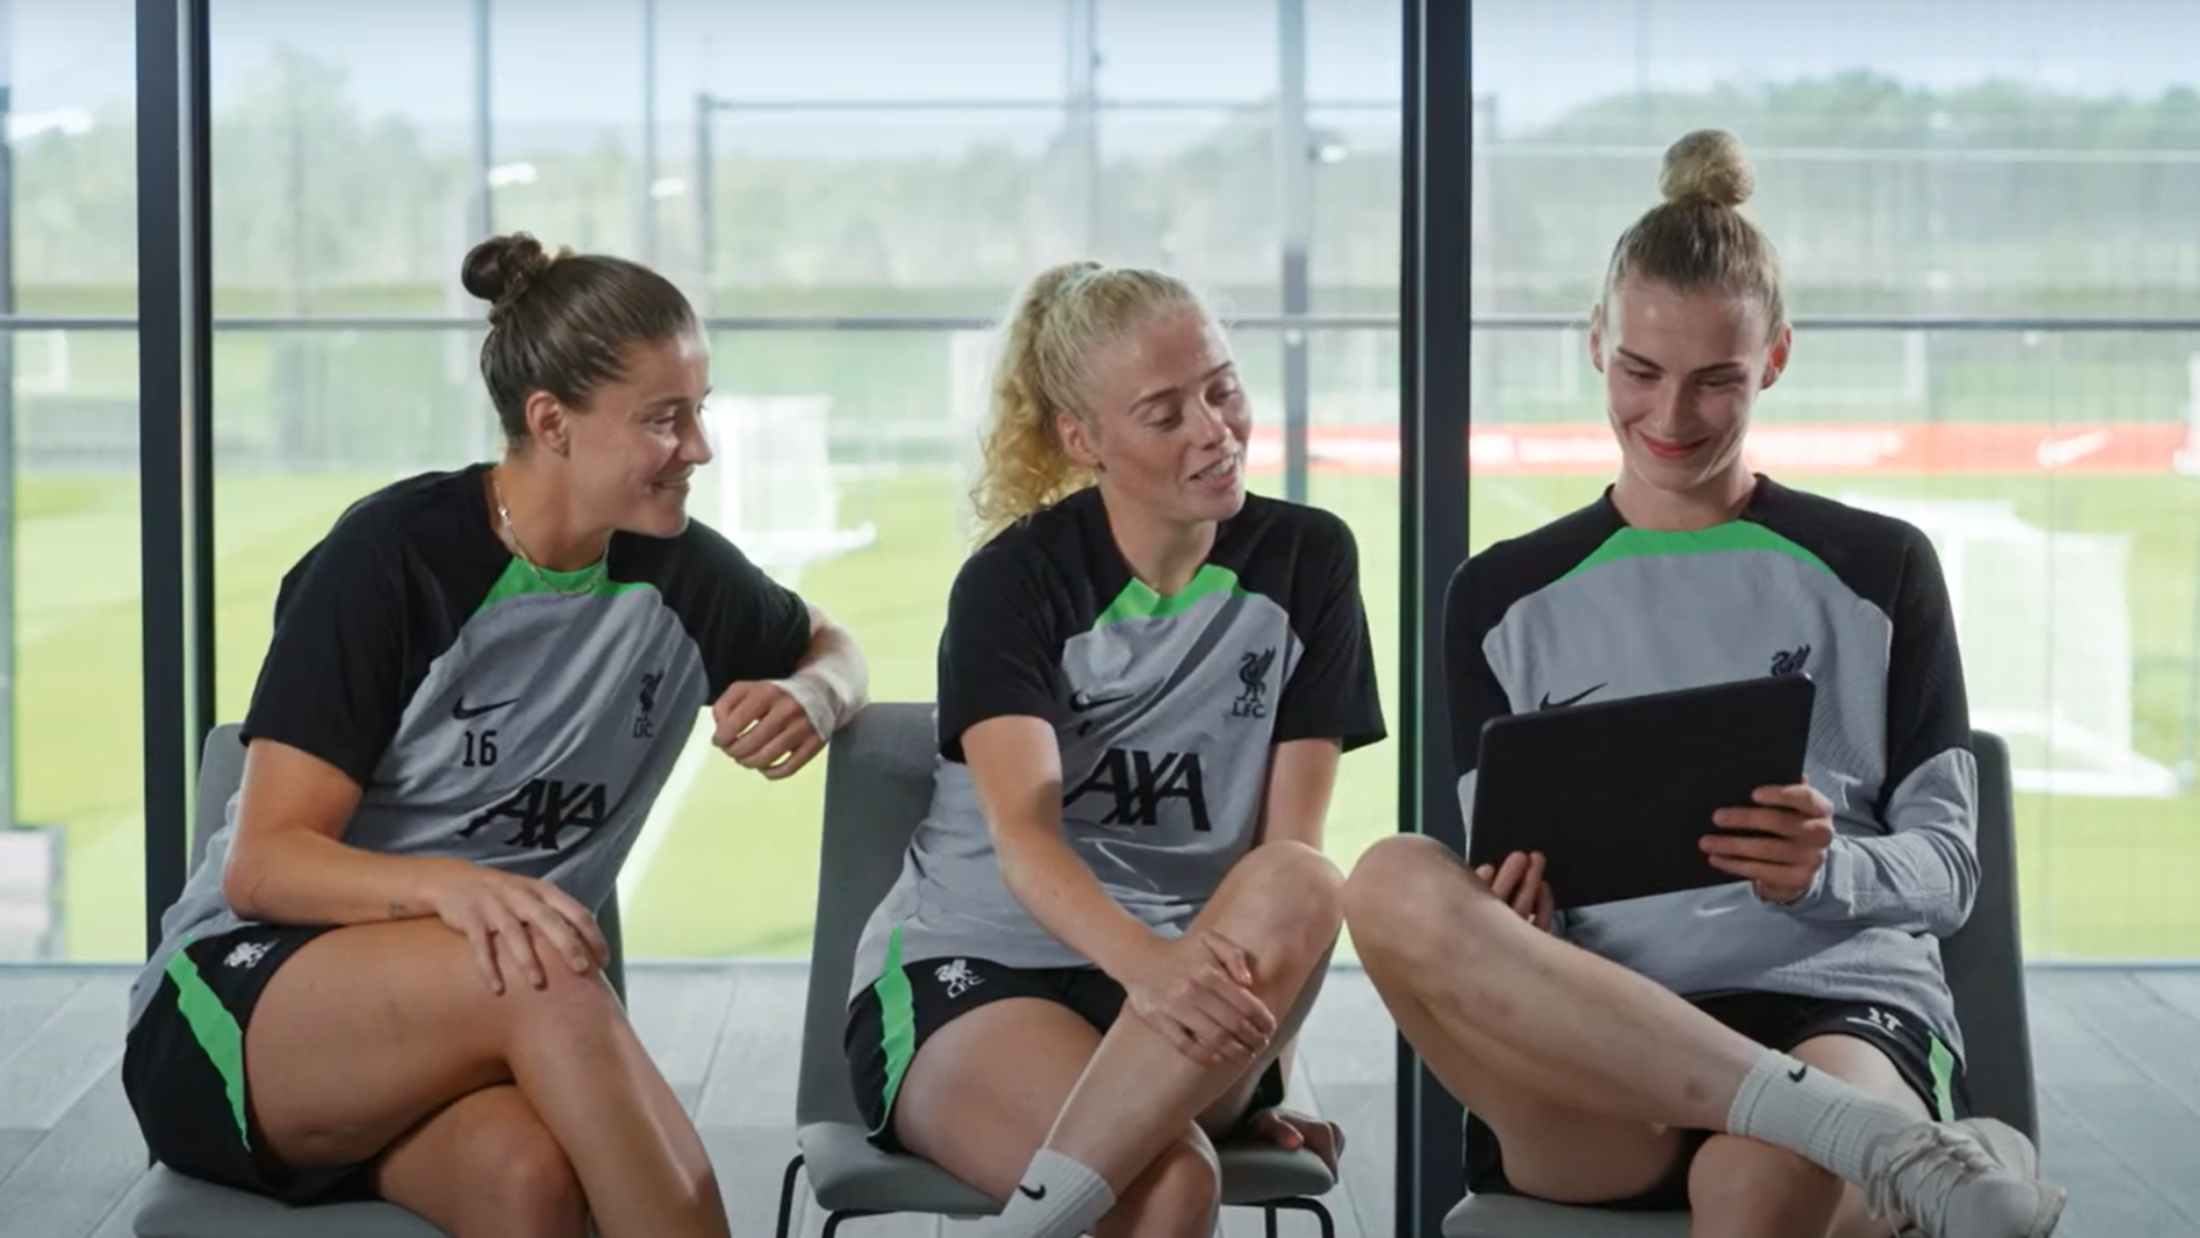 Interview with the Liverpool women's team